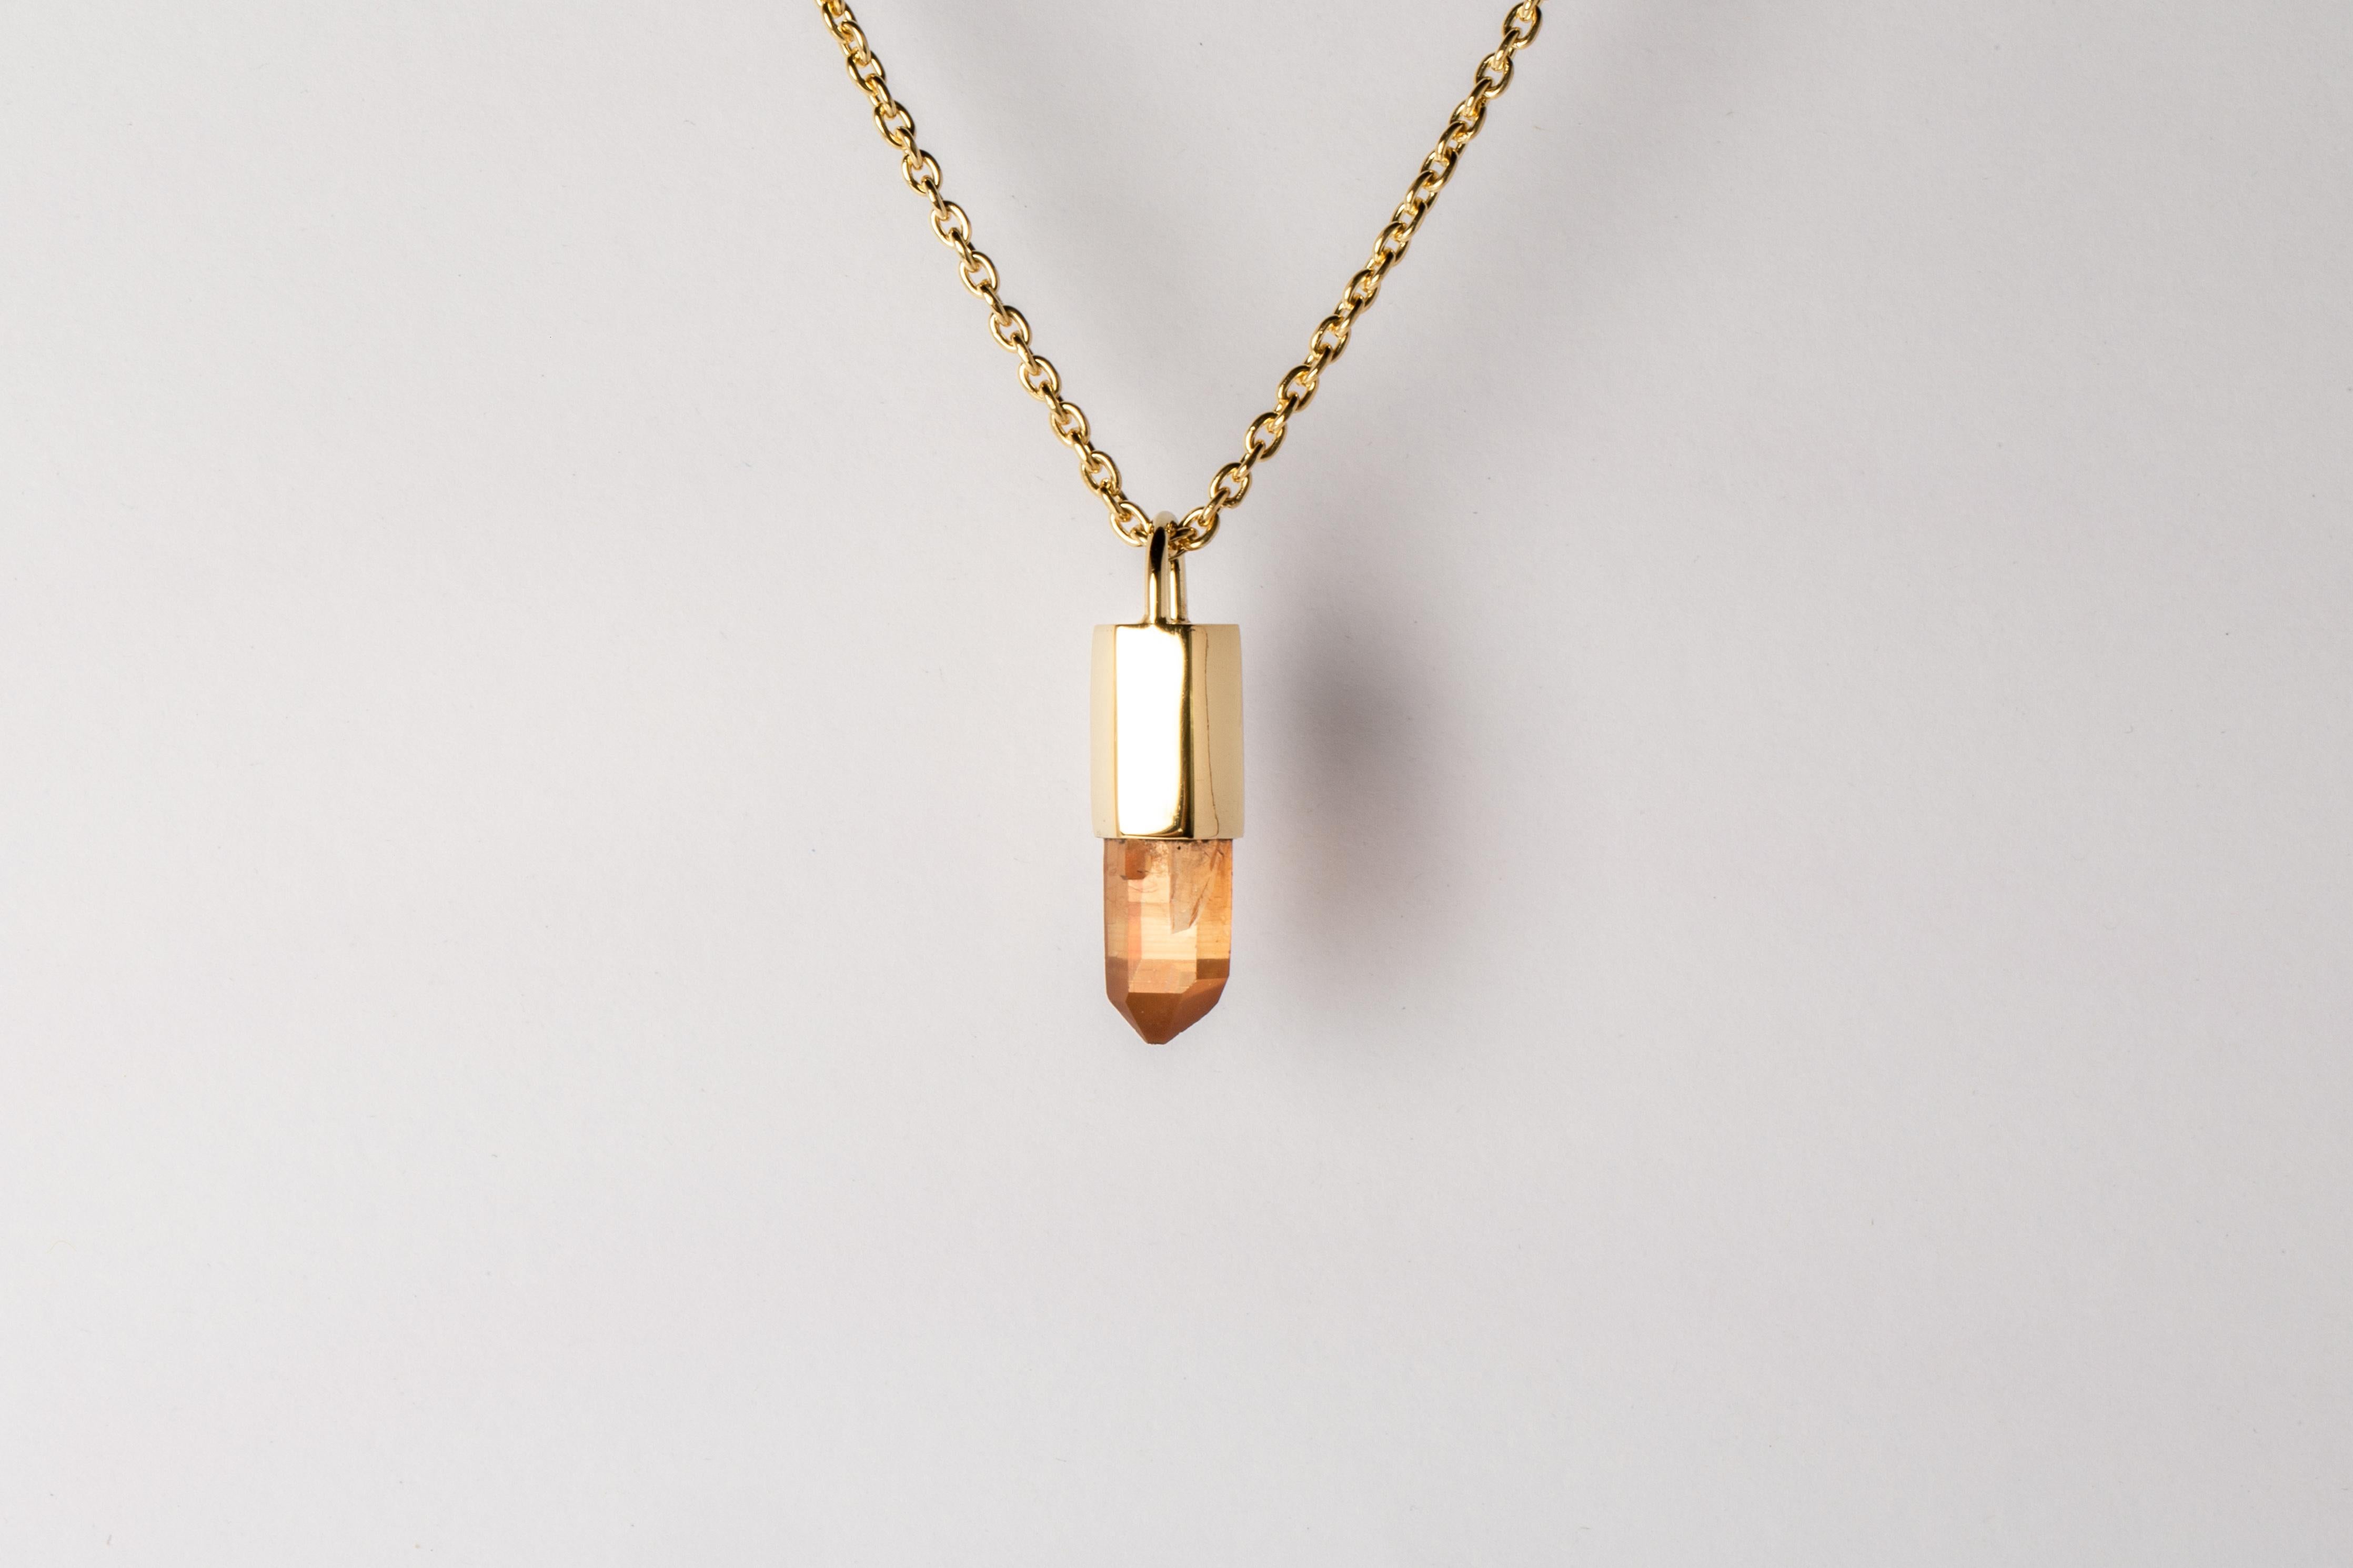 Pendant necklace in brass and sterling silver, it comes on a 74cm chain in sterling silver. Brass and sterling silver are substrate, polished and electroplated with 18k solid yellow gold and a slab of rough iron quartz. The Talisman series is an